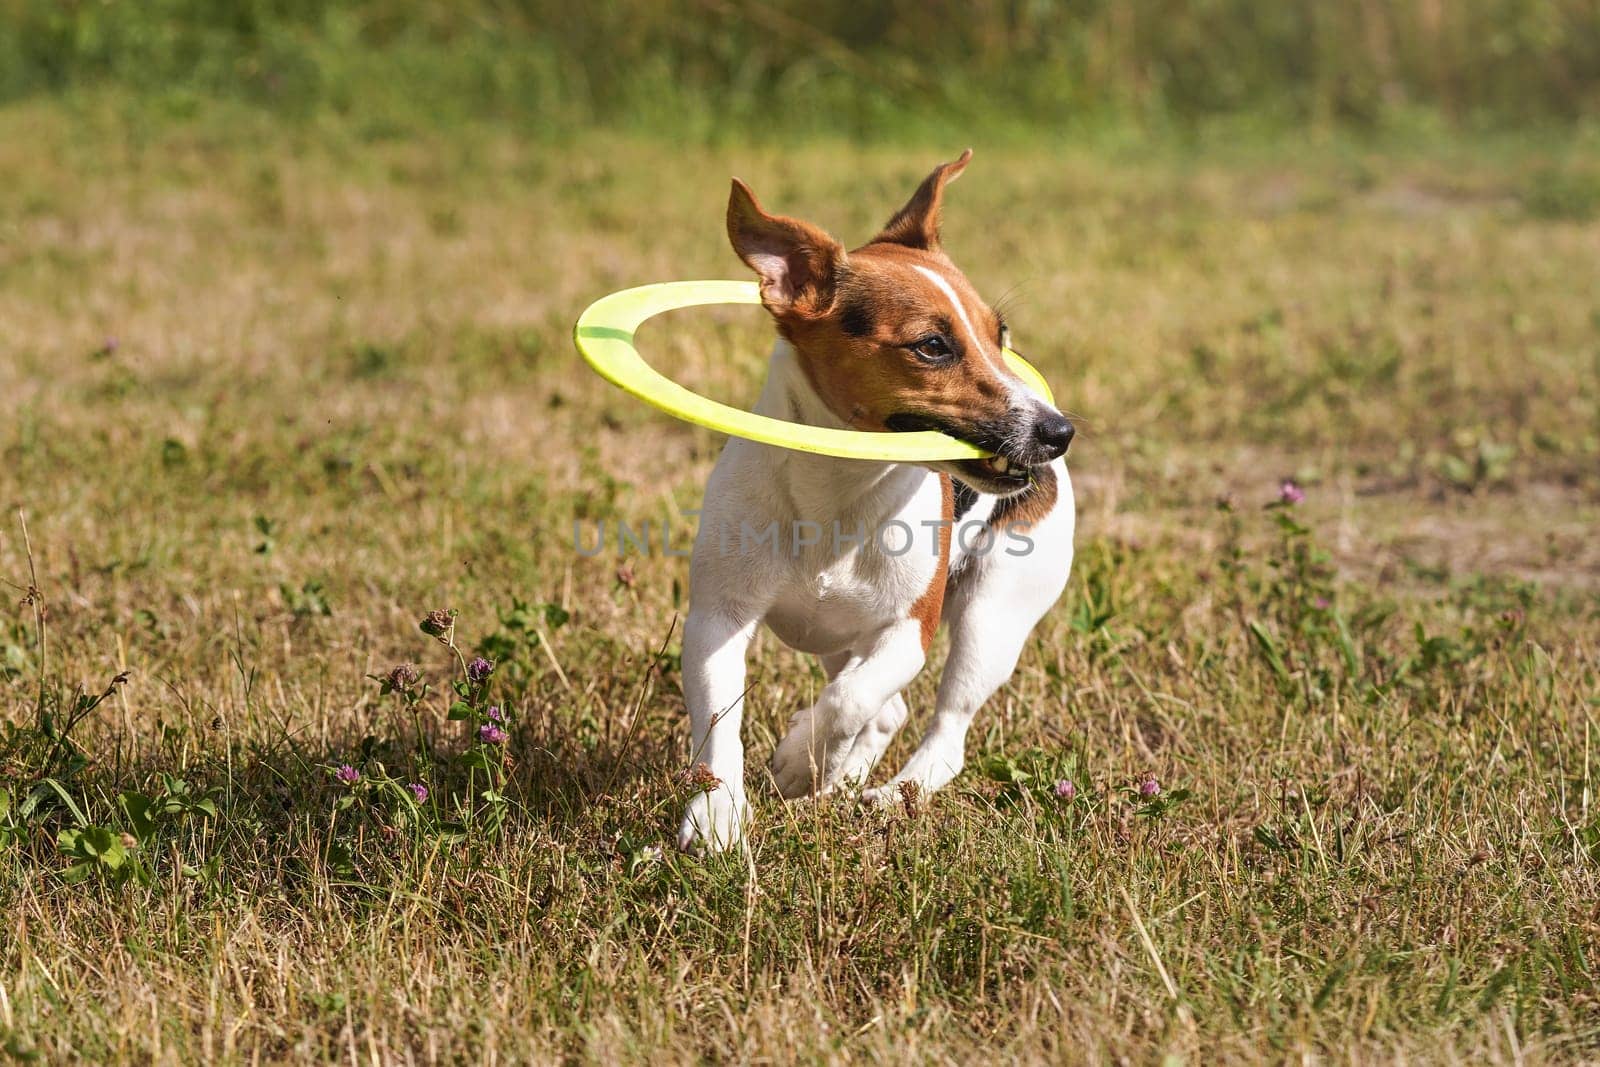 Jack Russell terrier playing with yellow plastic throwing disc on grass meadow, holding it in her mouth